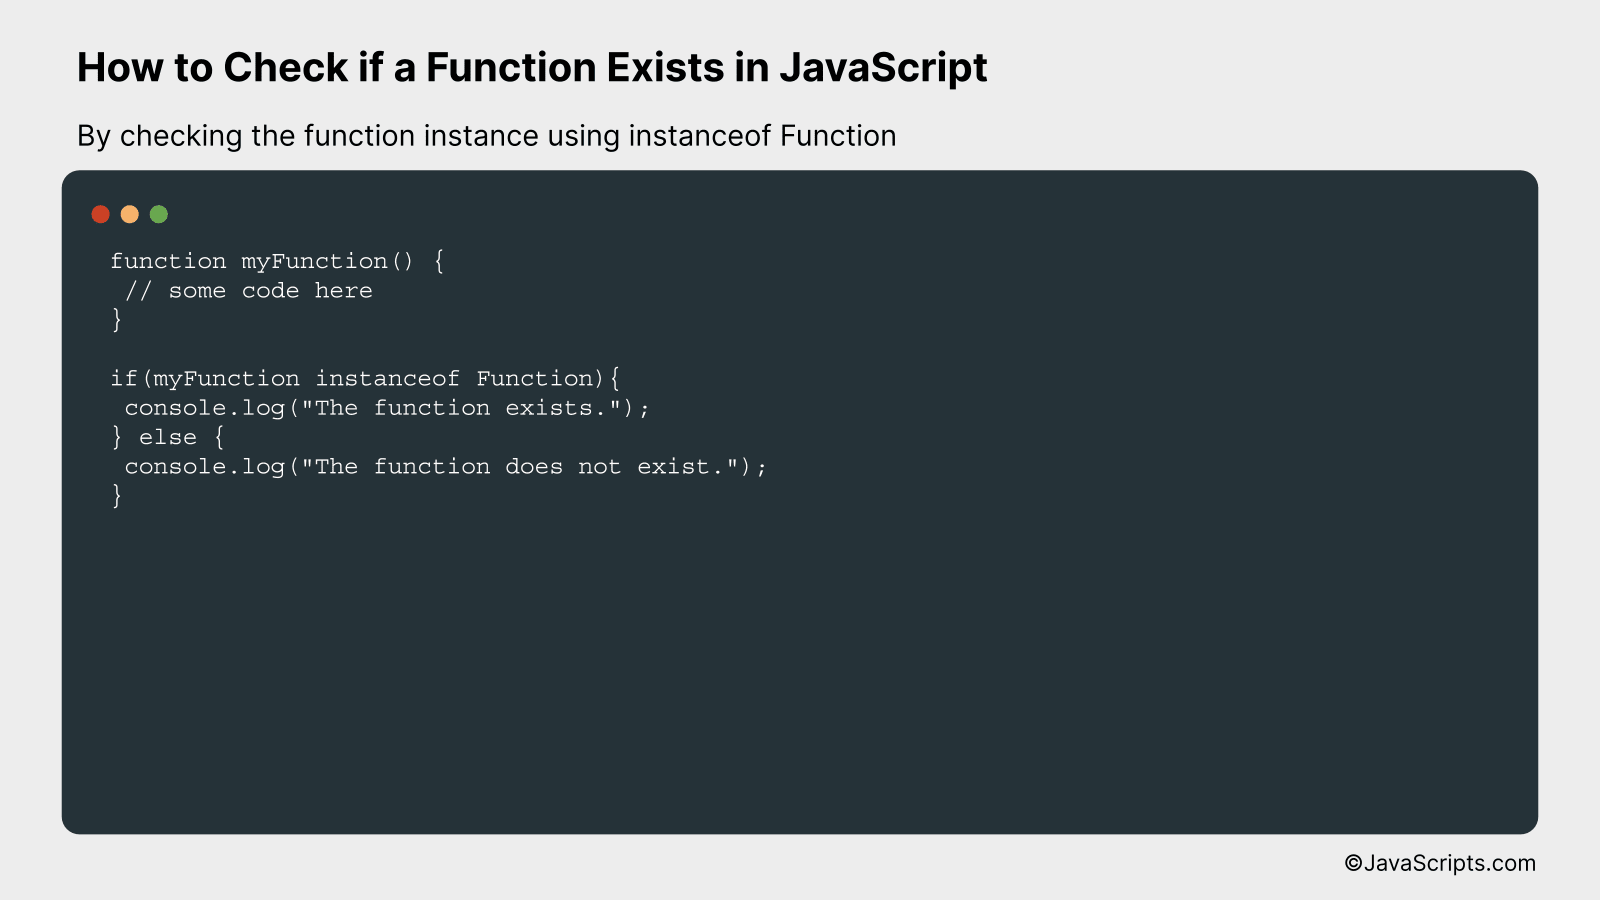 By checking the function instance using instanceof Function